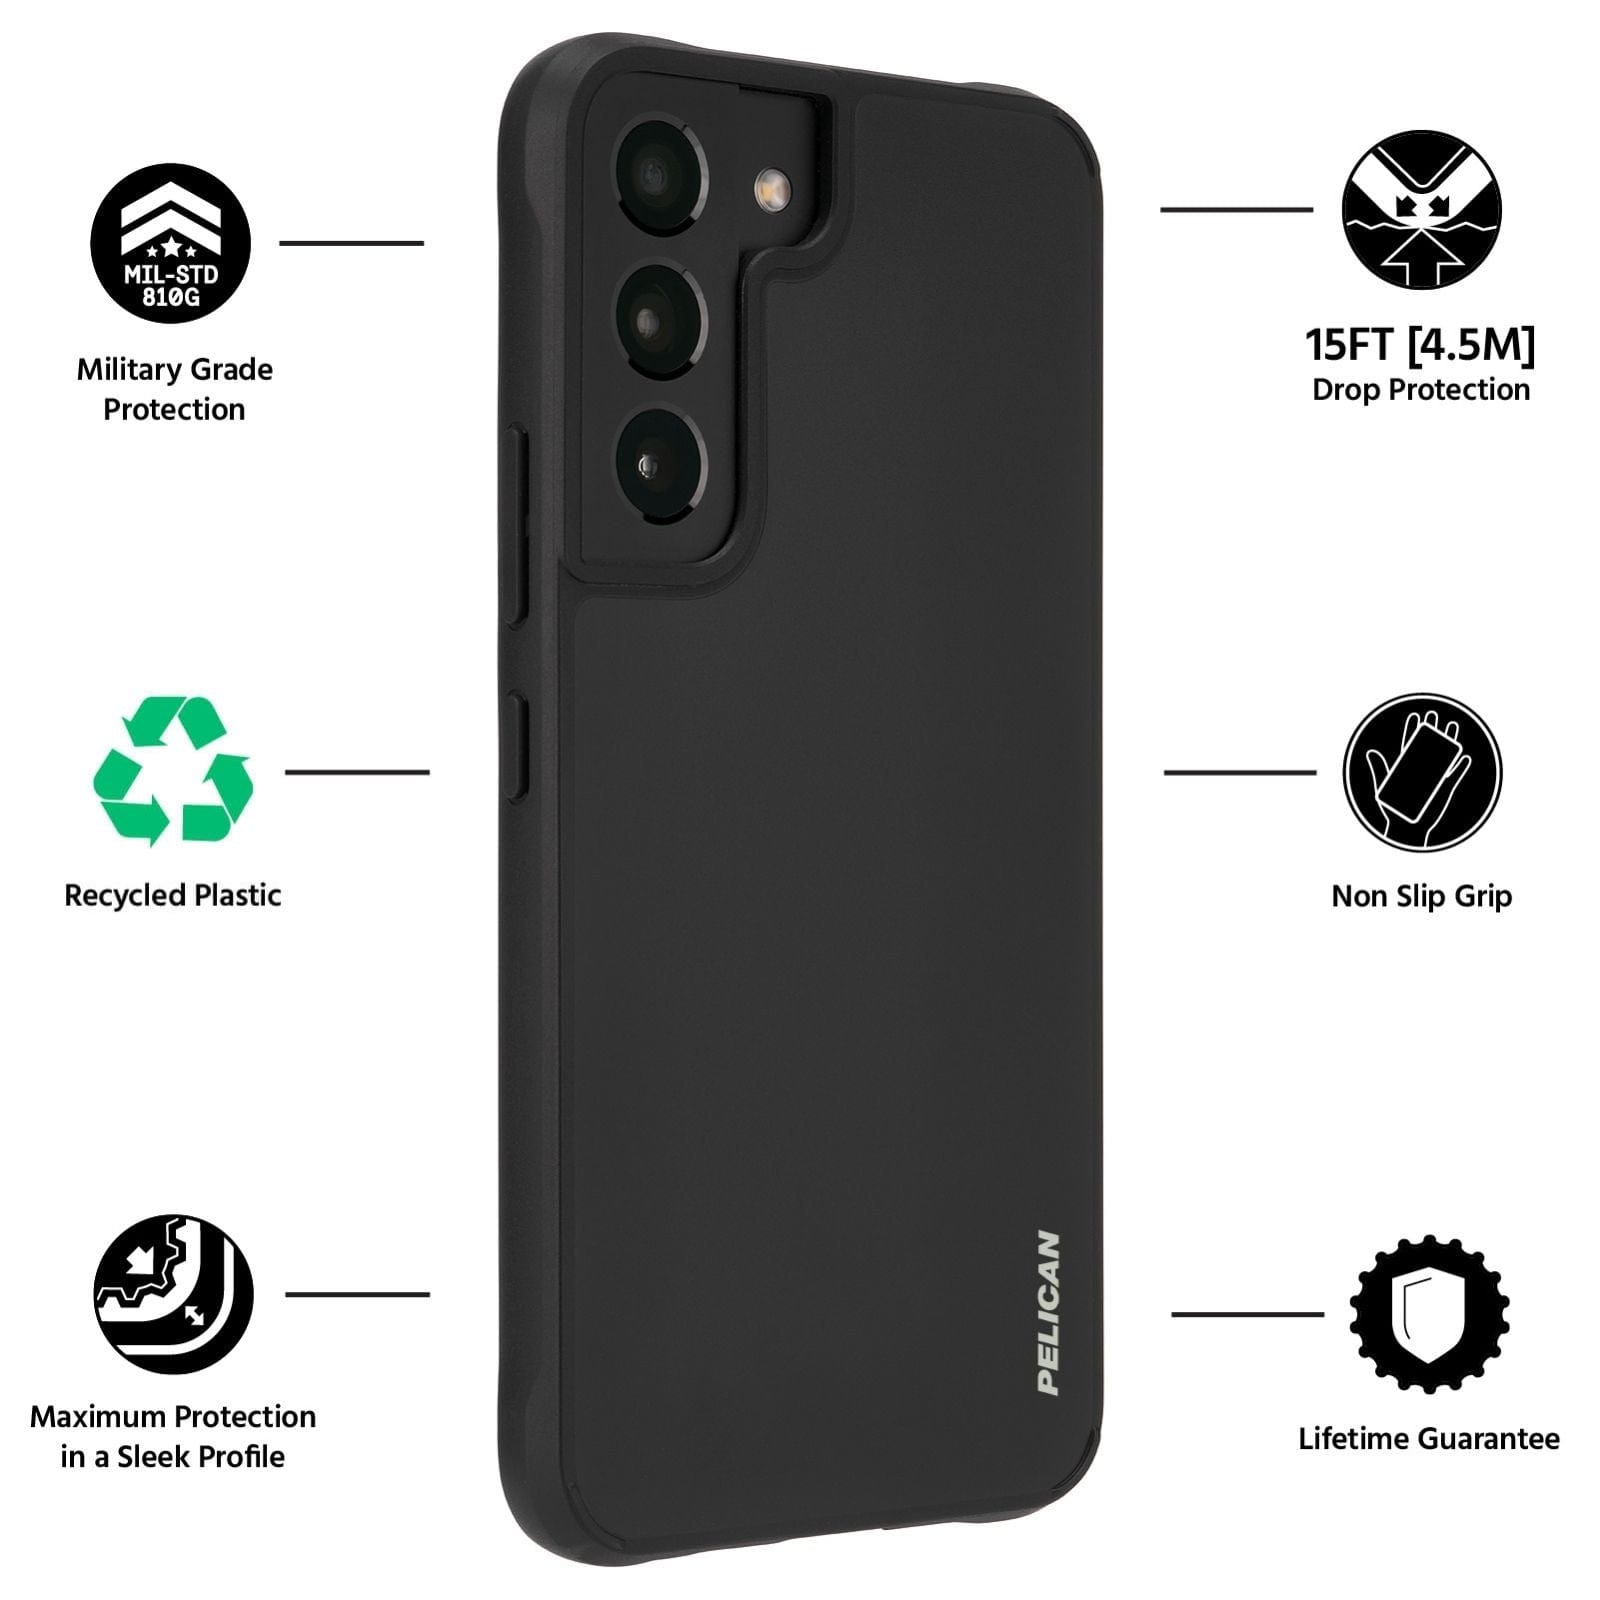 FEATURES: MILITARY GRADE PROTECTION, RECYCLED PLASTIC, MAXIMUM PROTECTION IN A SLEEK PROFILE., 15FT DROP PROTECTION, NON SLIP GRIP, LIFETIME GUARANTEE. COLOR::BLACK